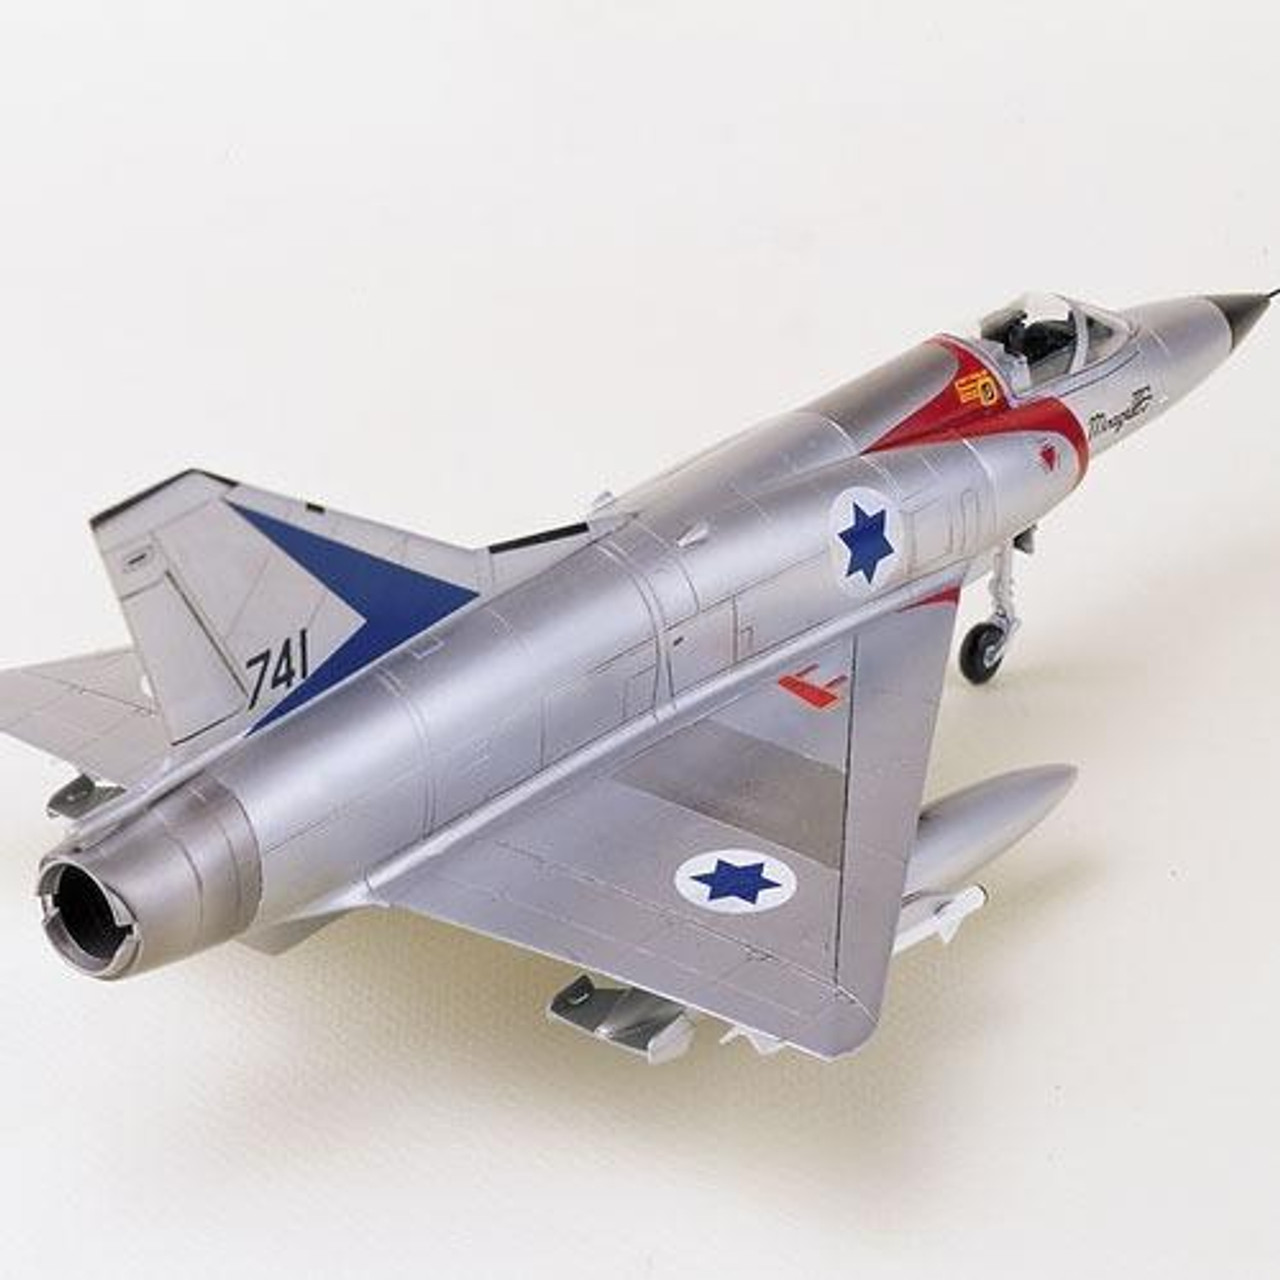 ACD12247 1/48 Academy MIRAGE III-C FIGHTER MMD Squadron